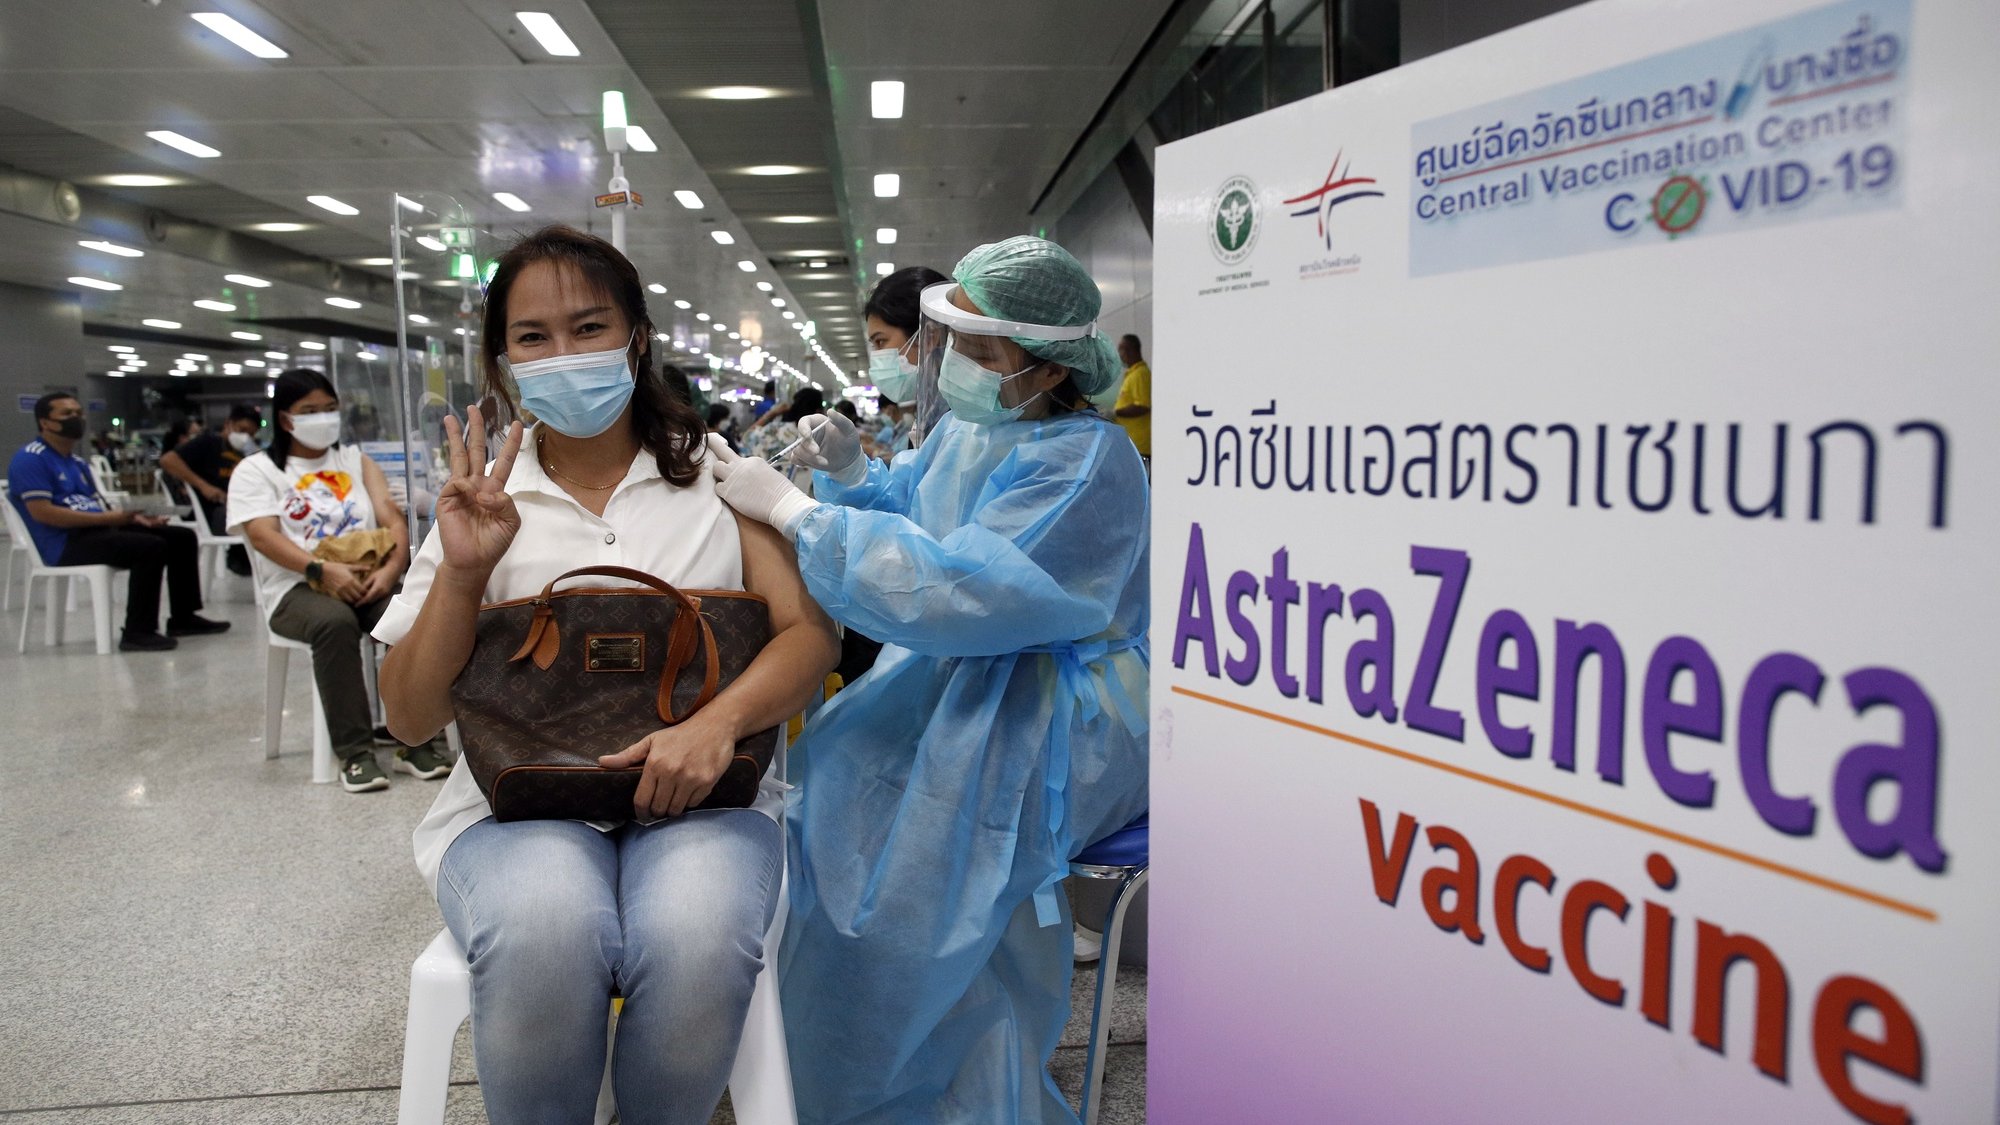 epa09485160 A Thai woman gestures while receiving a dose of AstraZeneca (Vaxzevria) vaccine for the third booster vaccination against COVID-19 at Bang Sue Central Vaccination Center in Bangkok, Thailand, 24 September 2021. Thailand rolled out third vaccination injections as a booster shot against COVID-19 for the public with AstraZeneca (Vaxzevria) vaccine amid the prolonged surge of COVID-19 infections. The Thai government plans to fully vaccinate 50 million people by the end of 2021, according to the Health Minister.  EPA/RUNGROJ YONGRIT (RESEND)